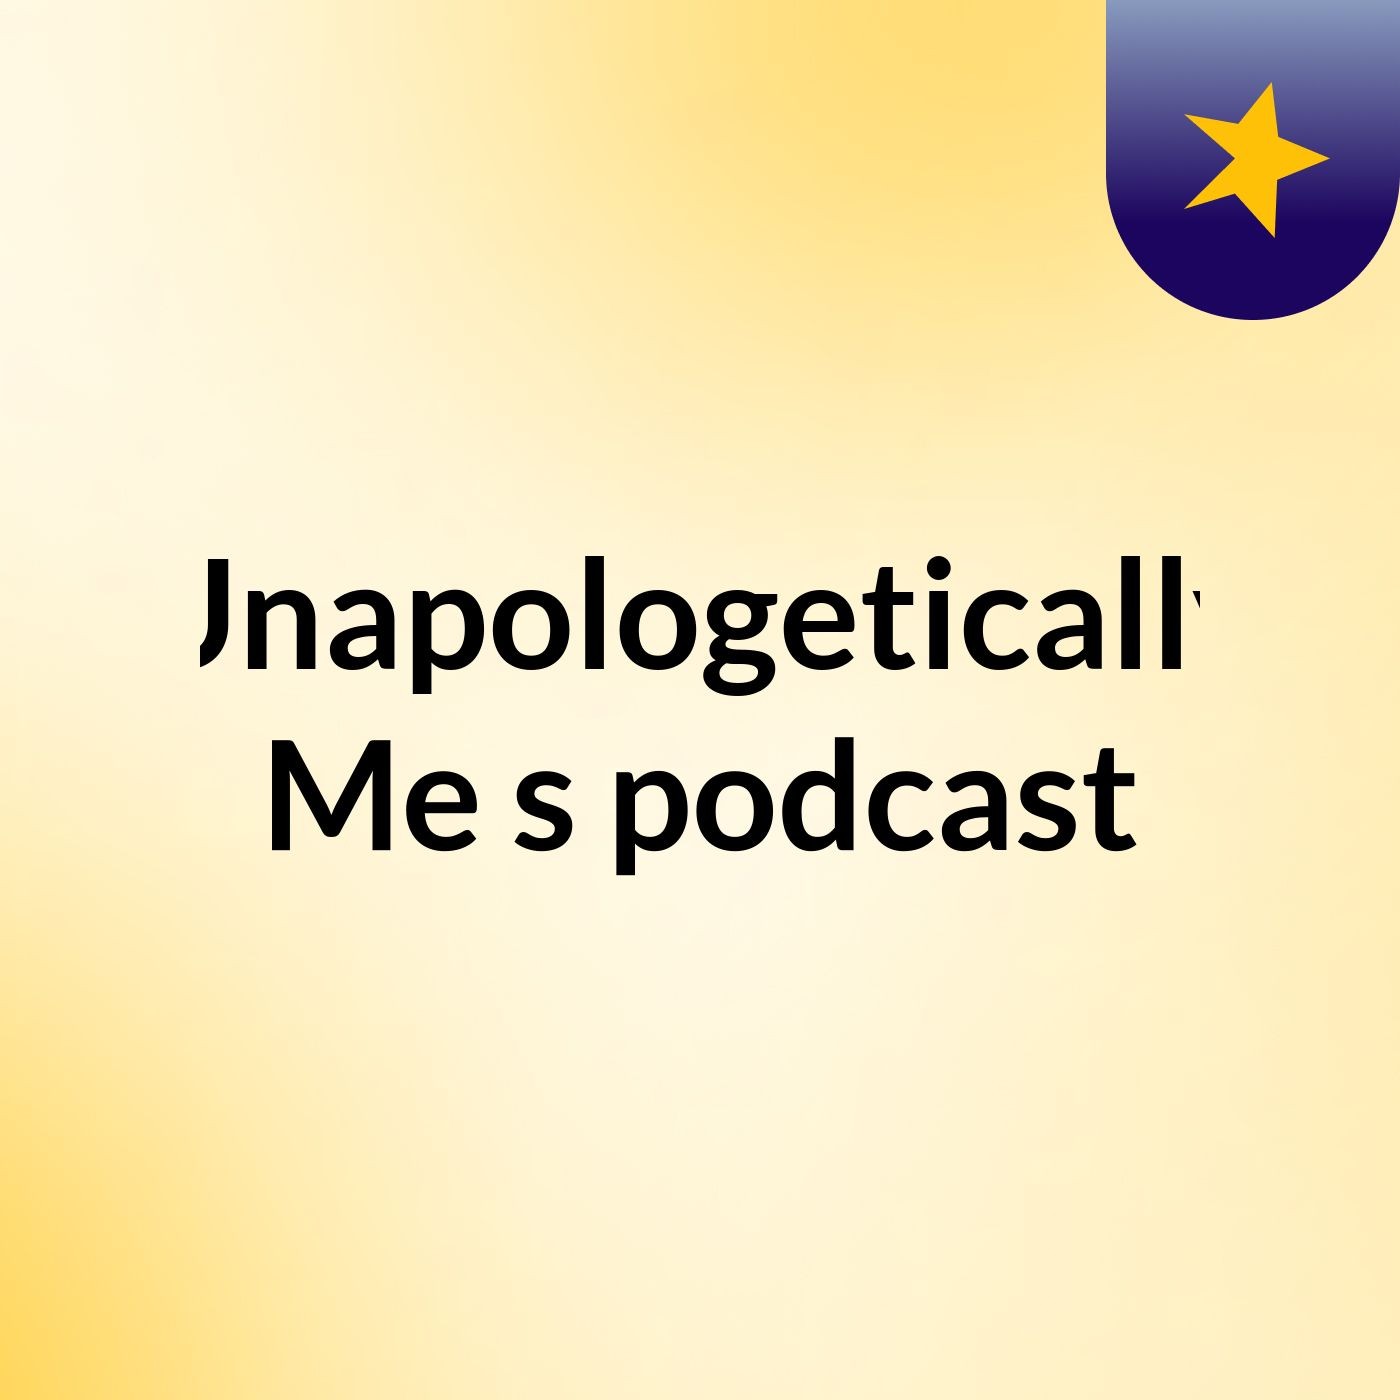 Episode 5 - Unapologetically Me's podcast Don't live No Lie